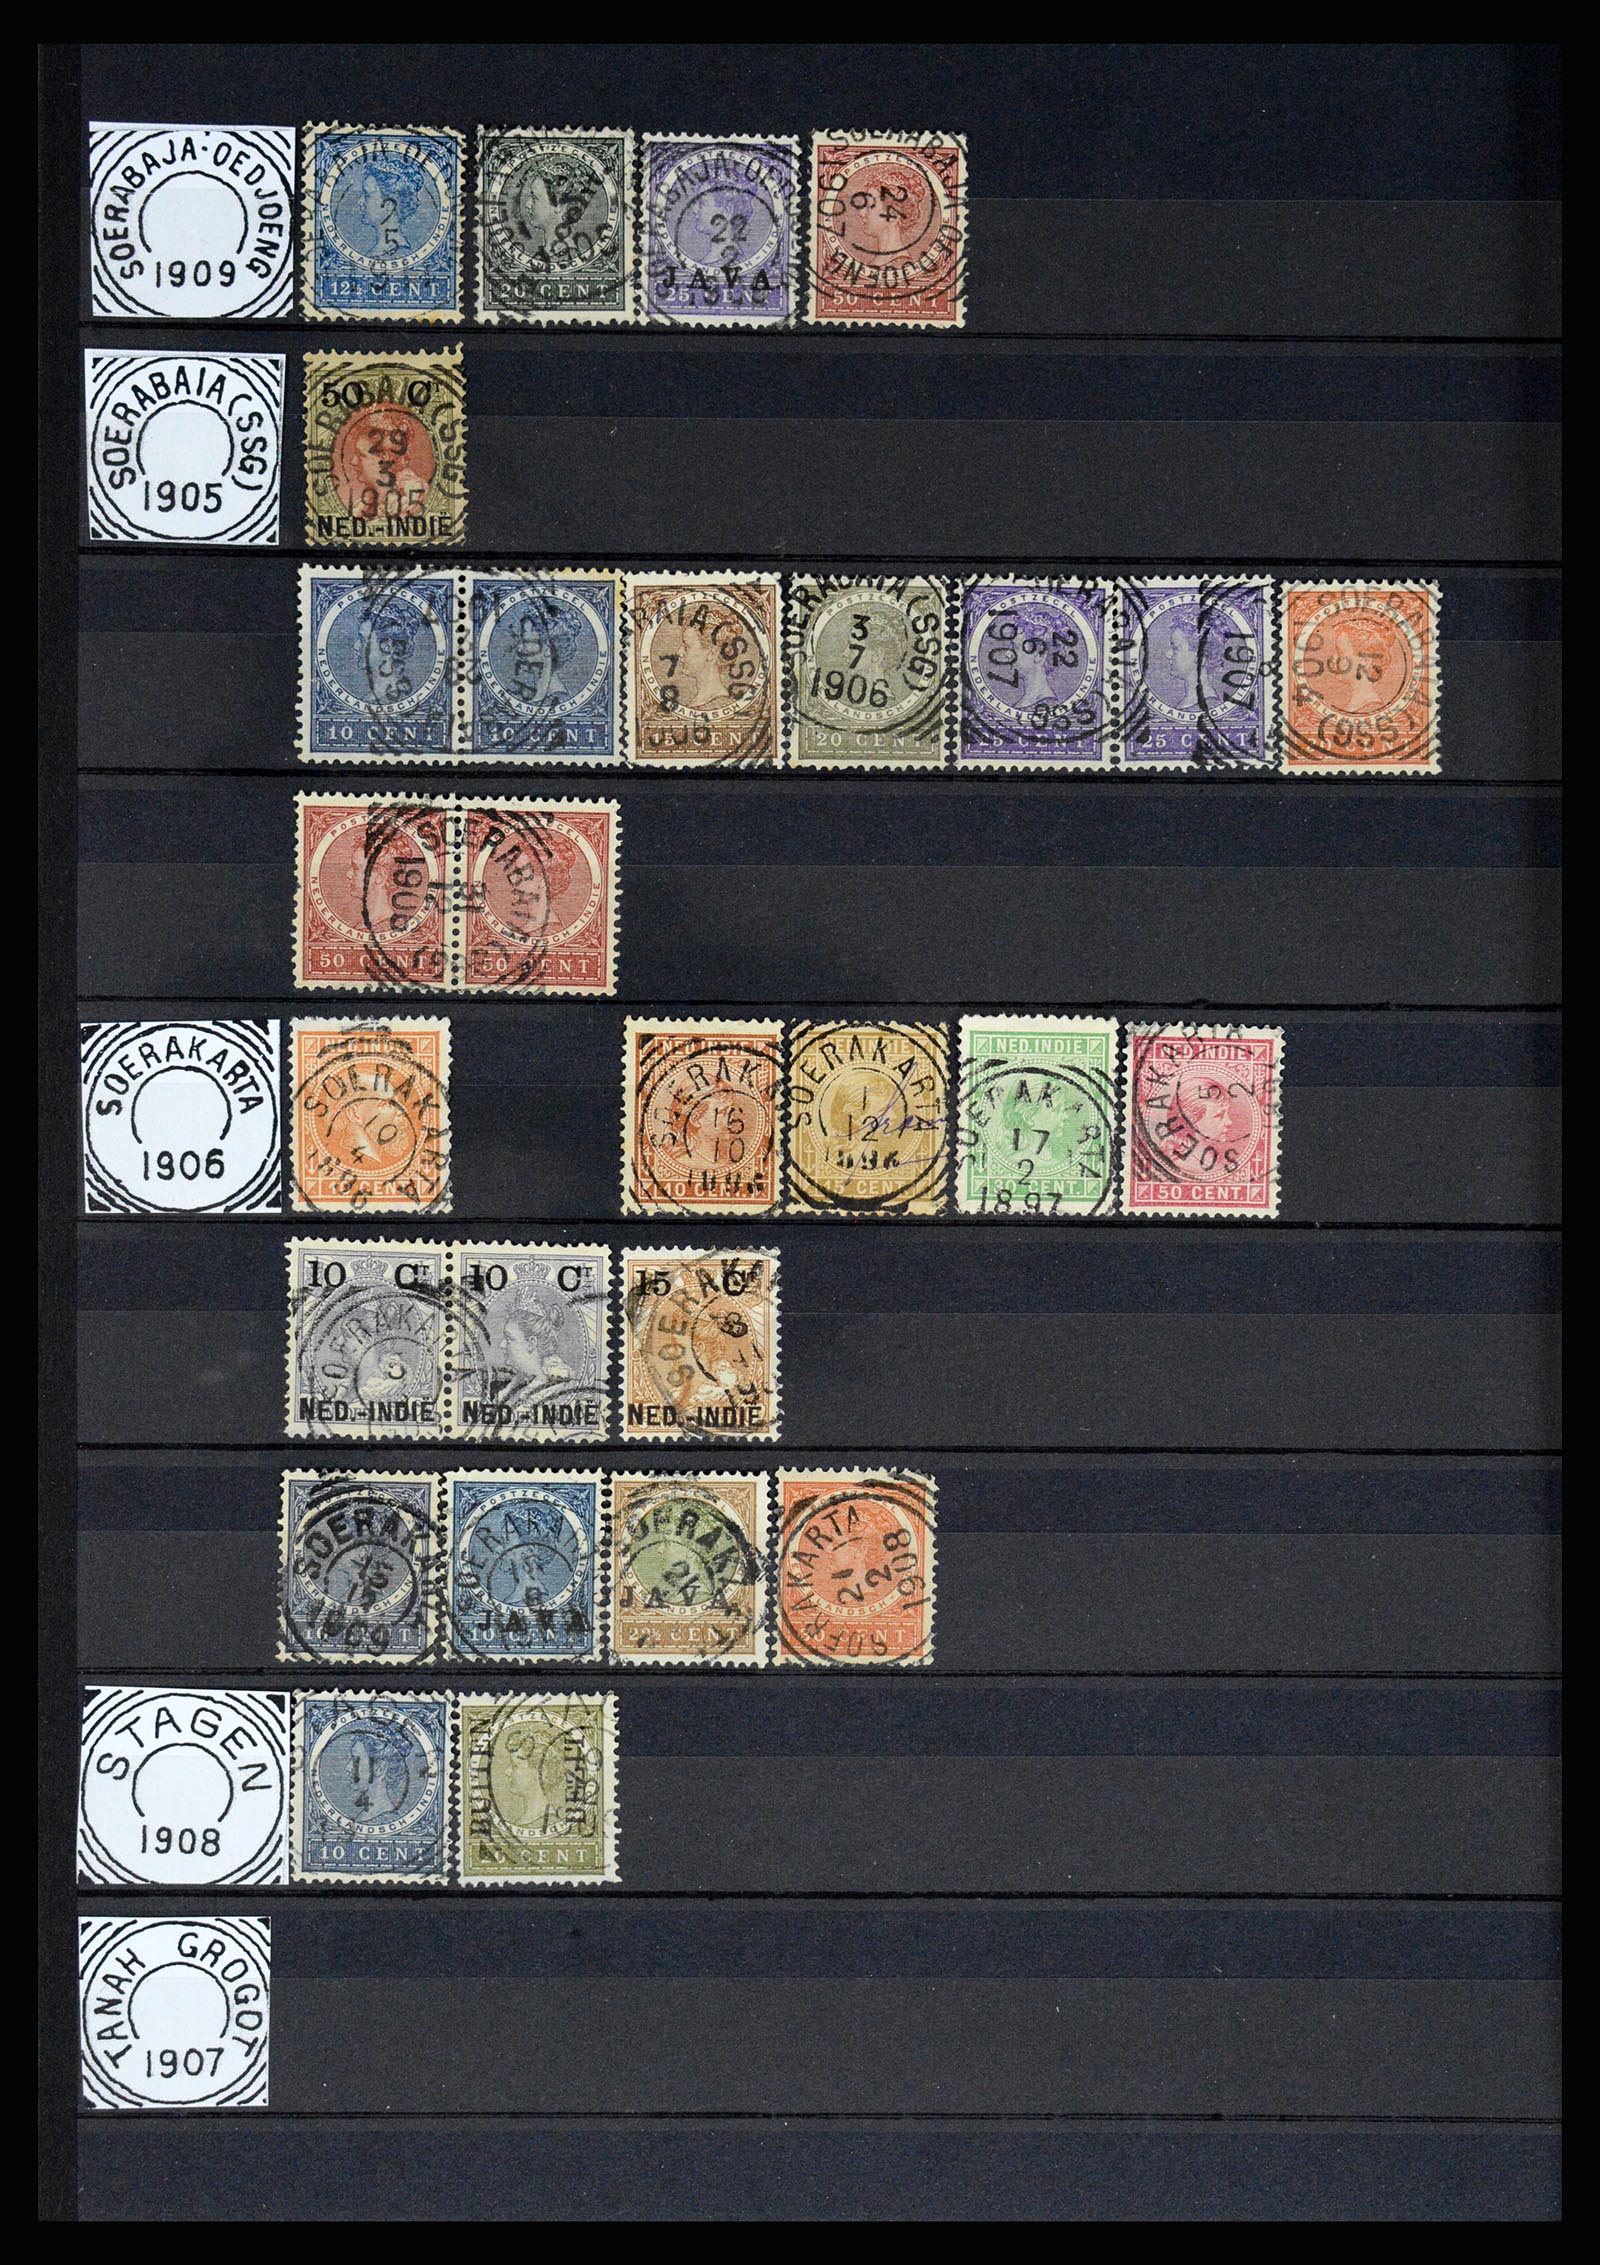 36839 051 - Stamp collection 36839 Dutch east Indies square cancels.